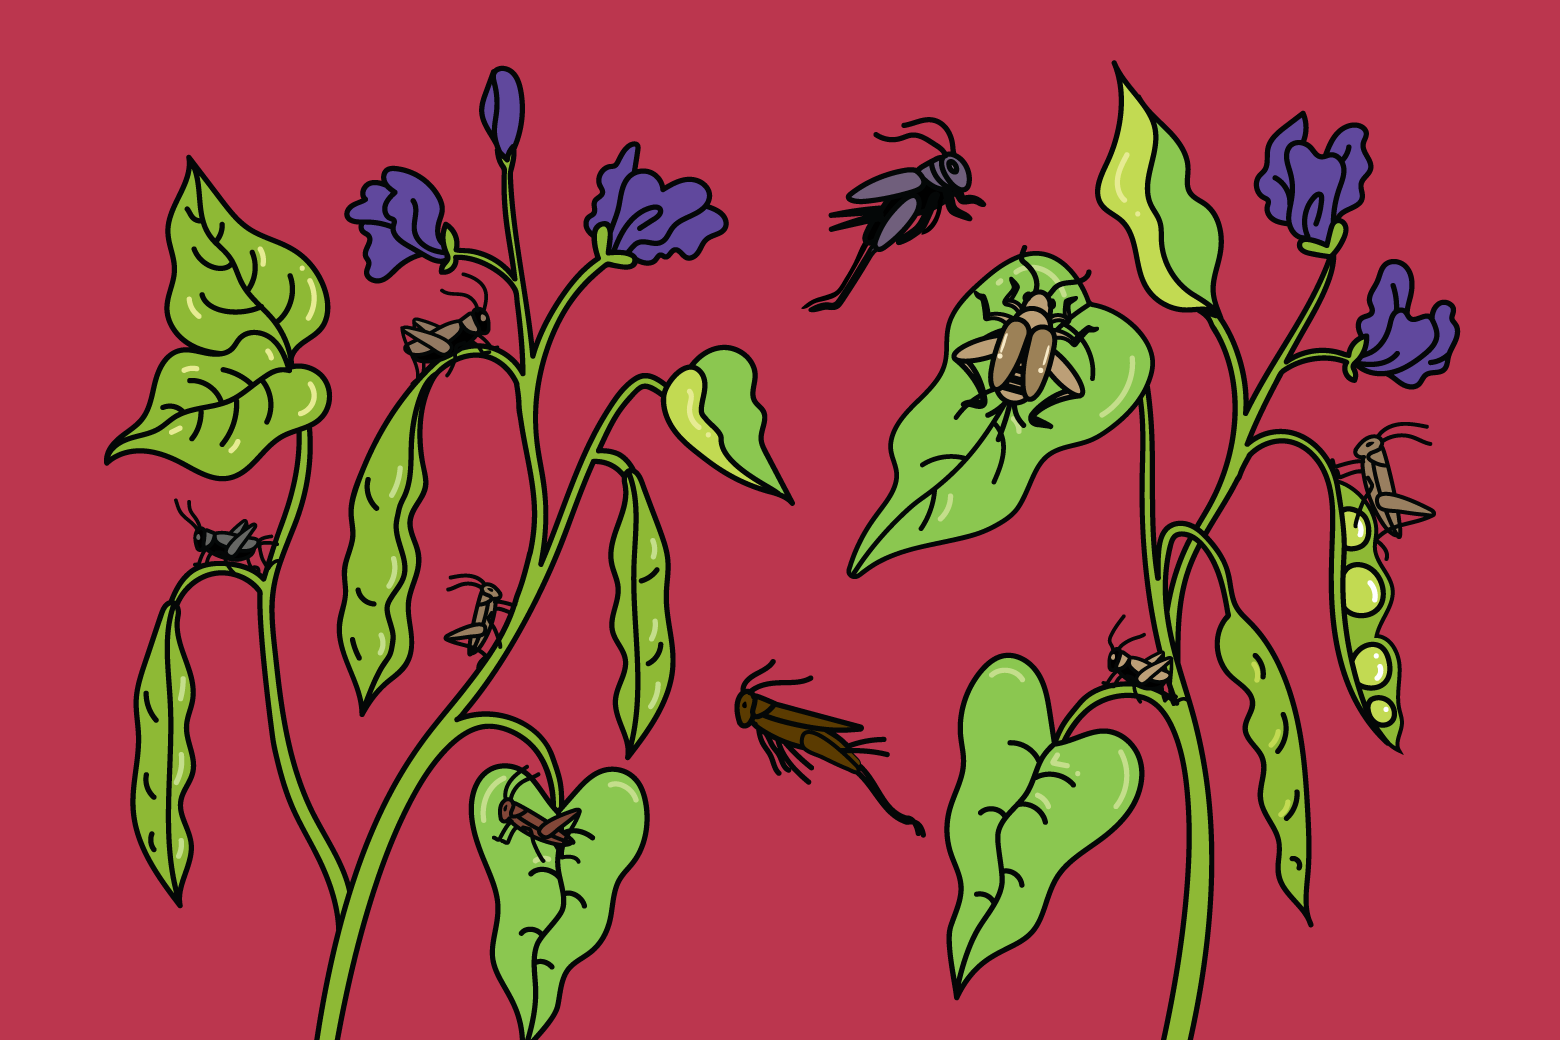 Illustration of crickets jumping on leaves. 